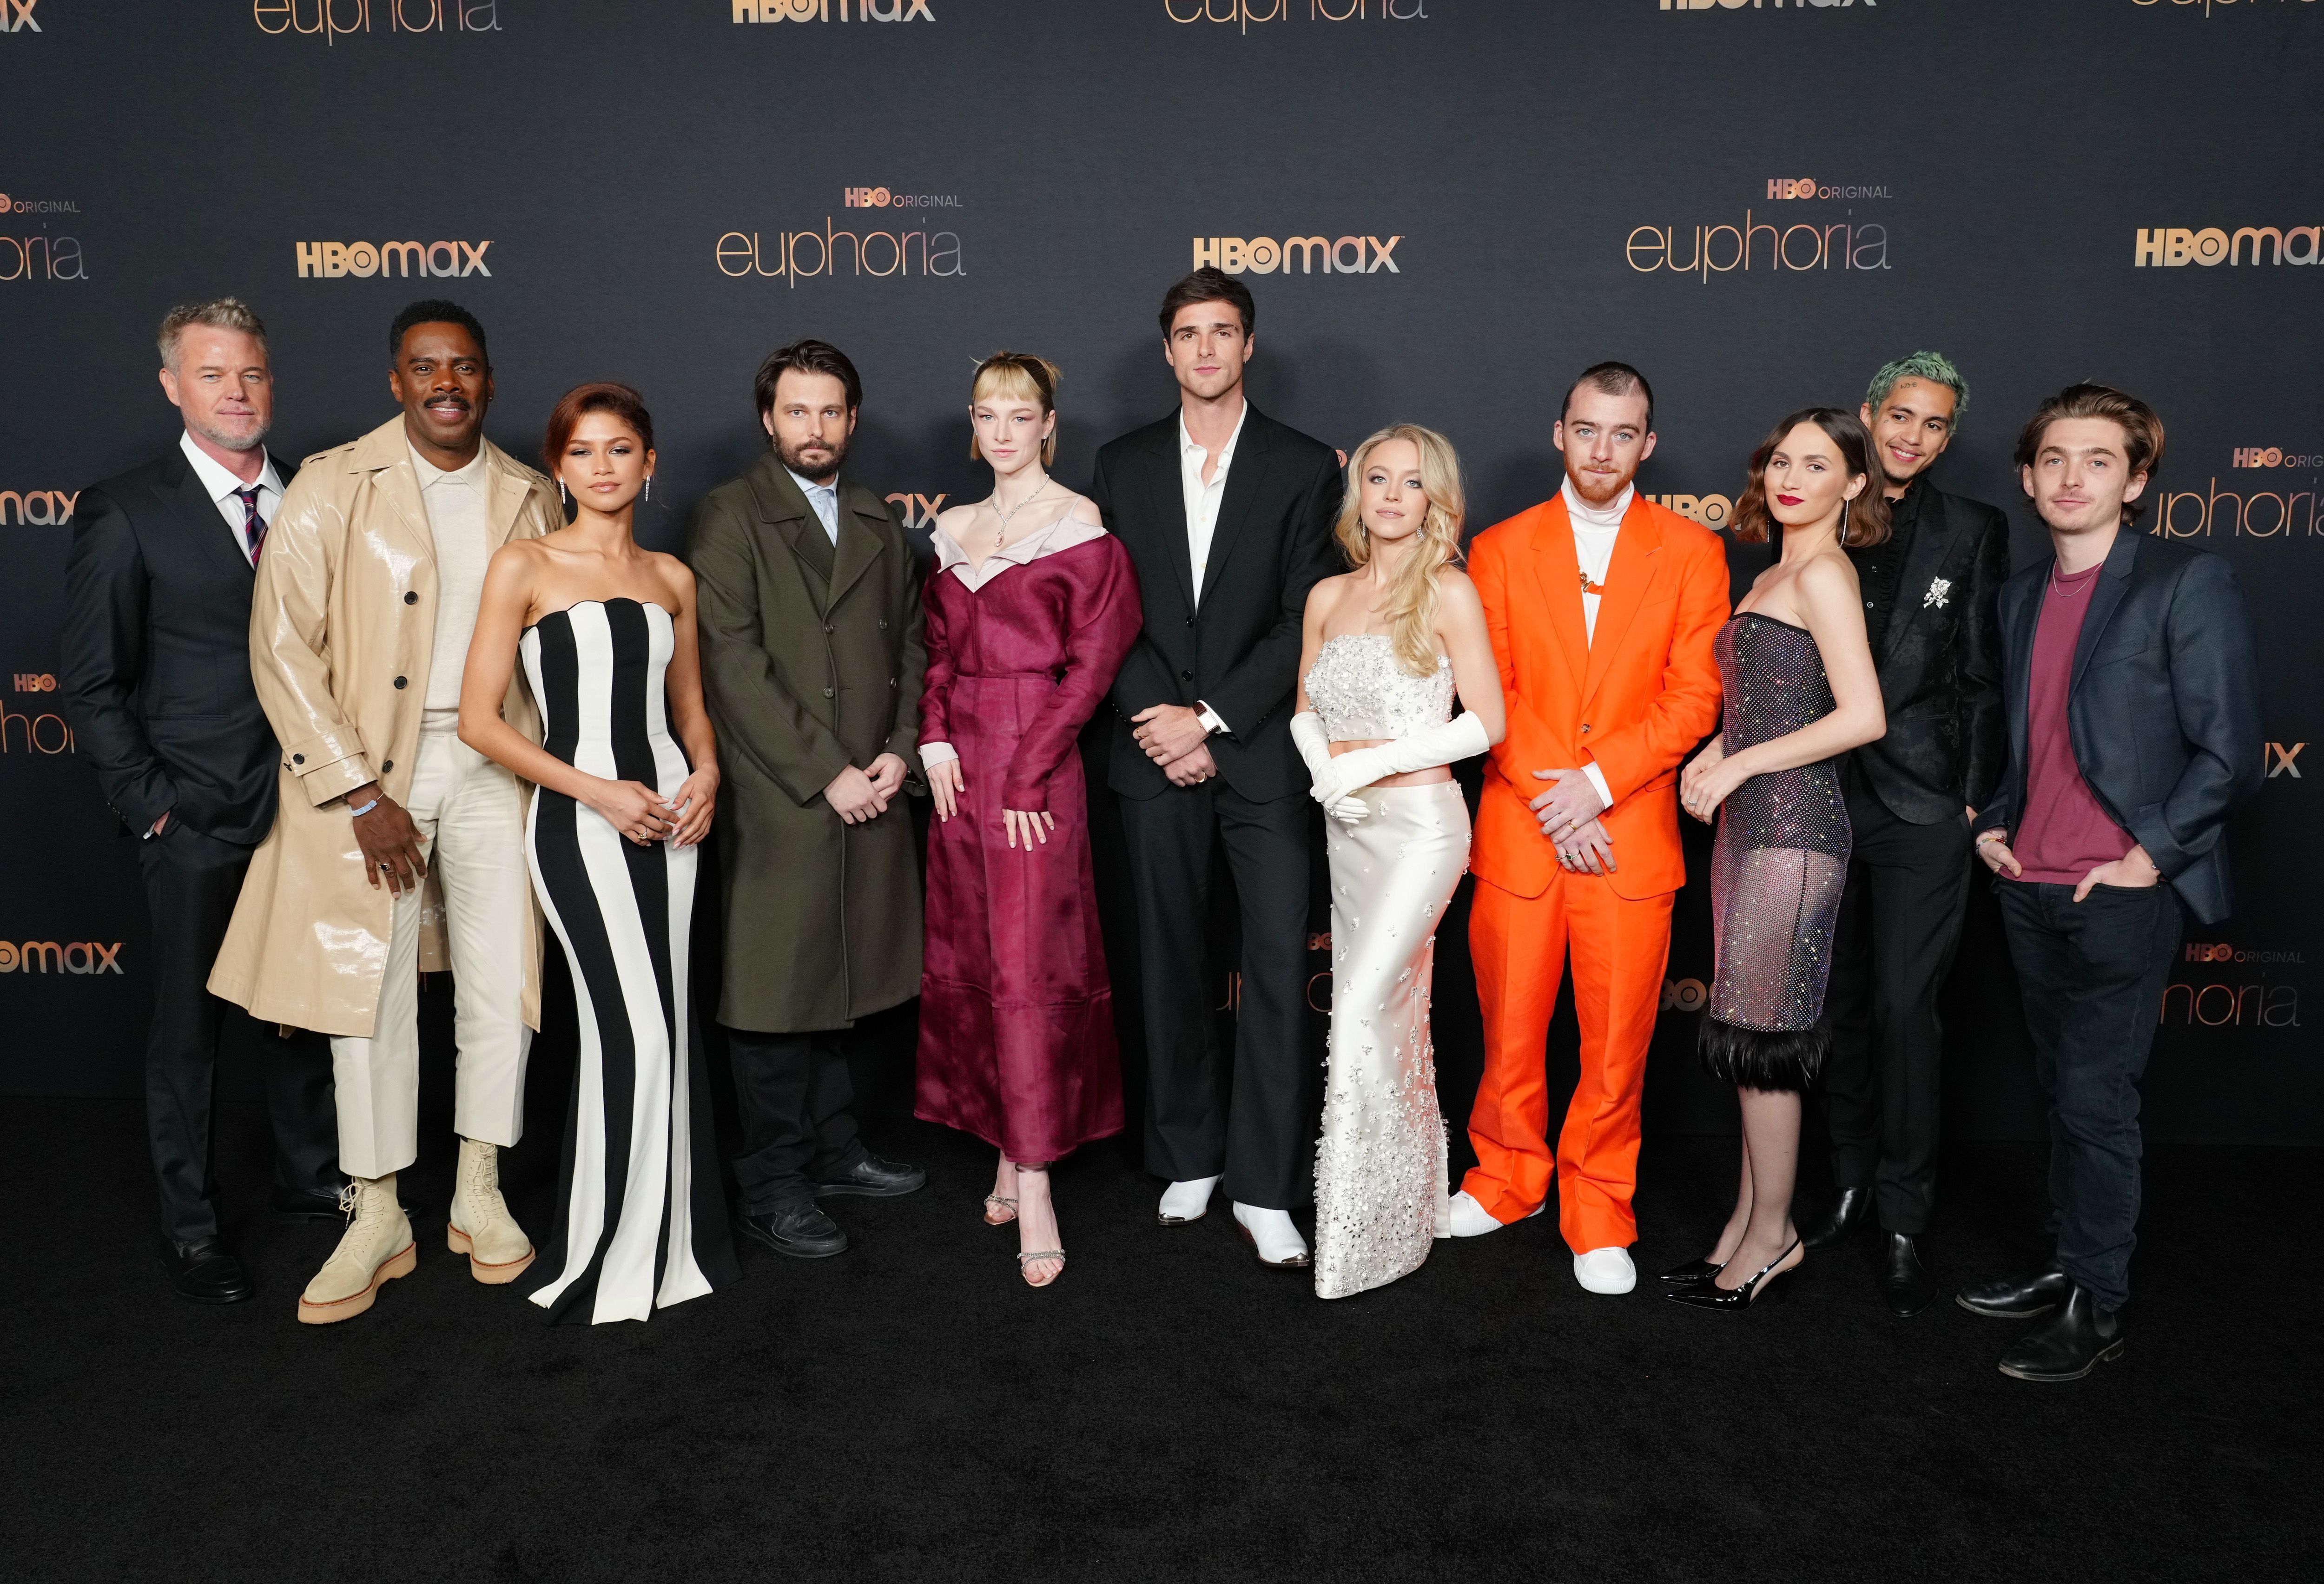 The cast of Euphoriaattend HBO's "Euphoria" Season 2 Photo Call. How much older is the Euphoria cast than the characters they portray?